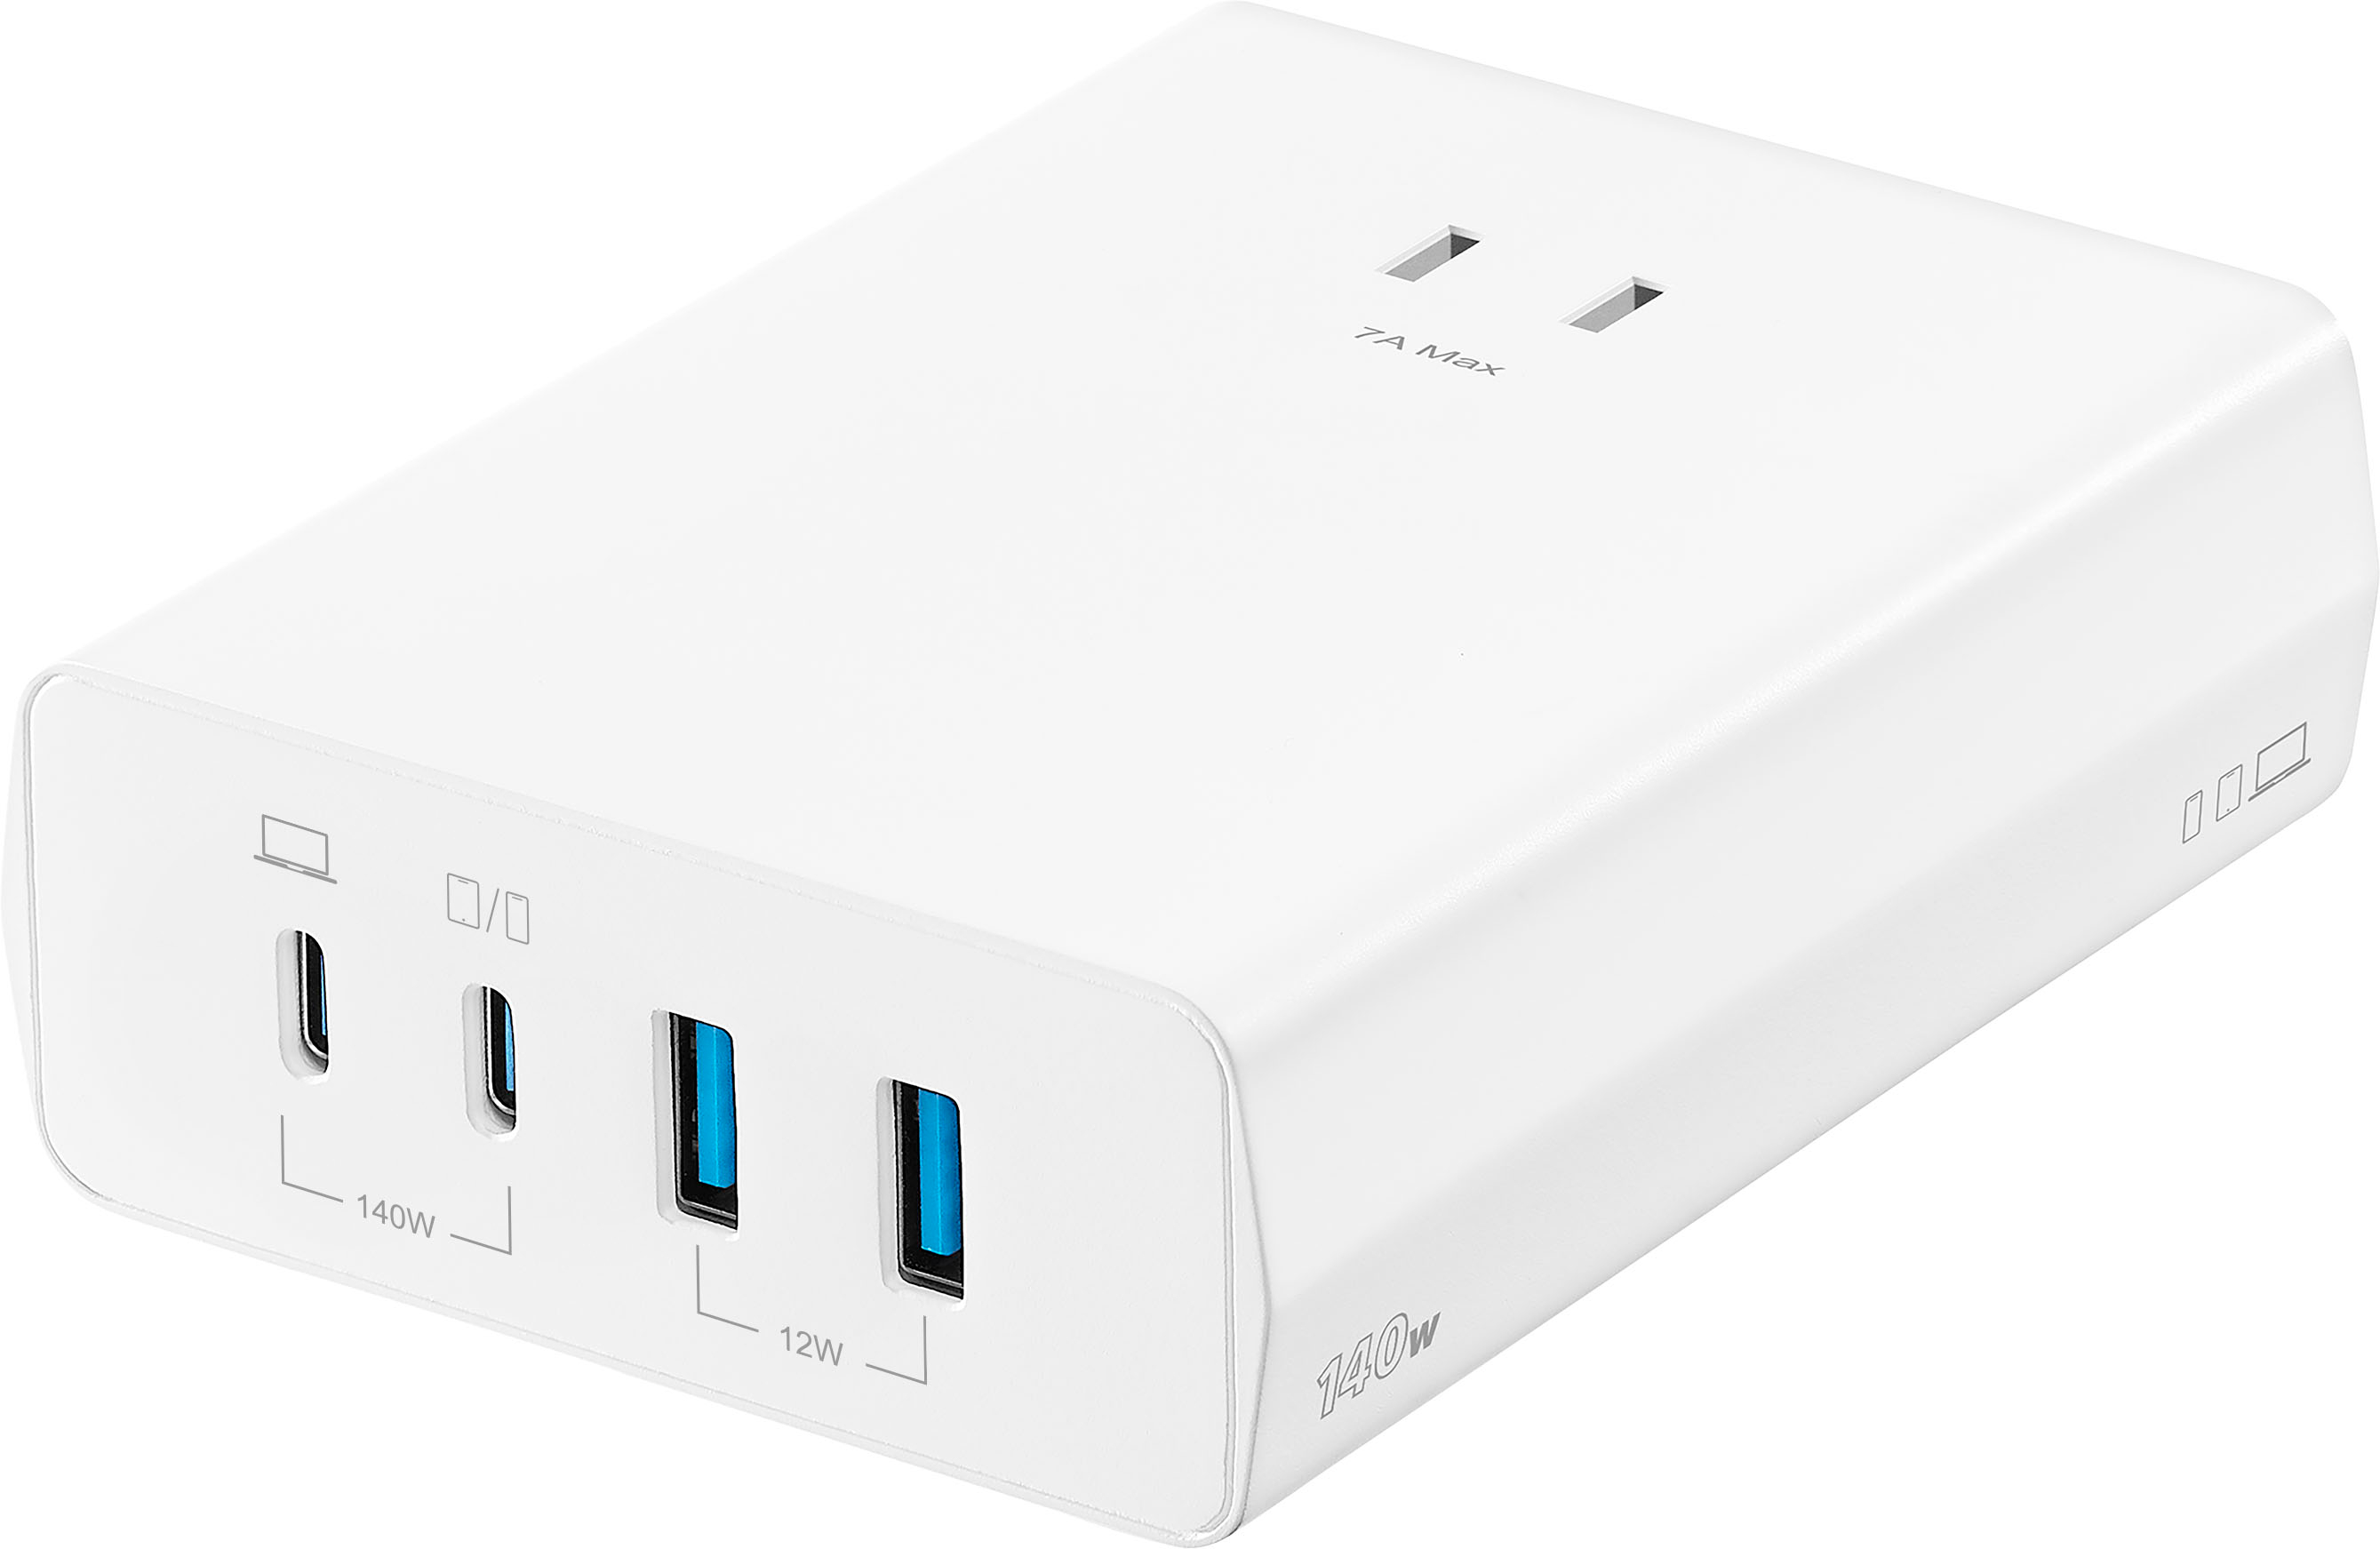 Insignia - 140W 4-Port USB and USB-C Desktop Charger Kit for MacBook Pro 16” and More - White